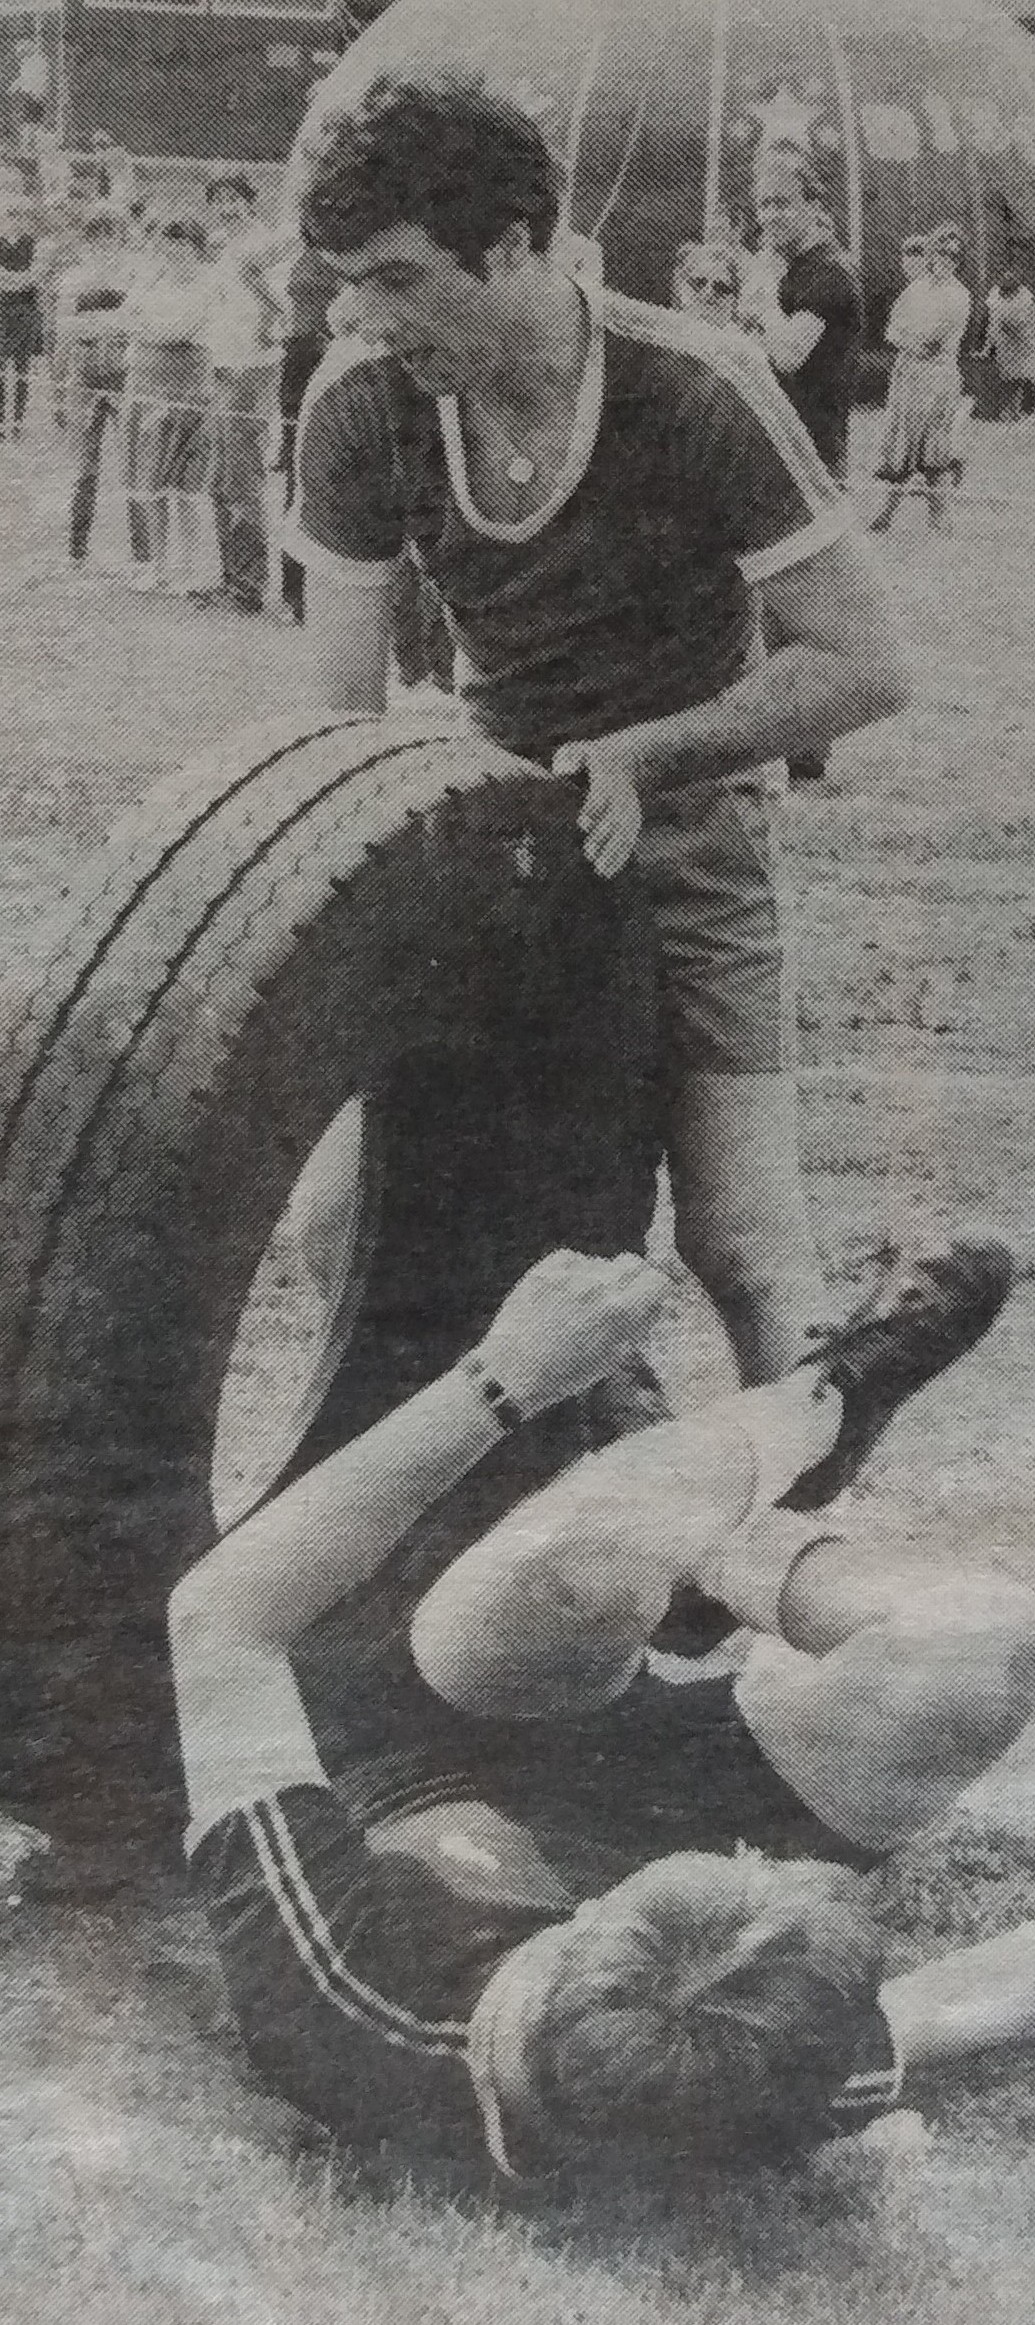 All tyred out on the obstacle course at the City Show in June 1984